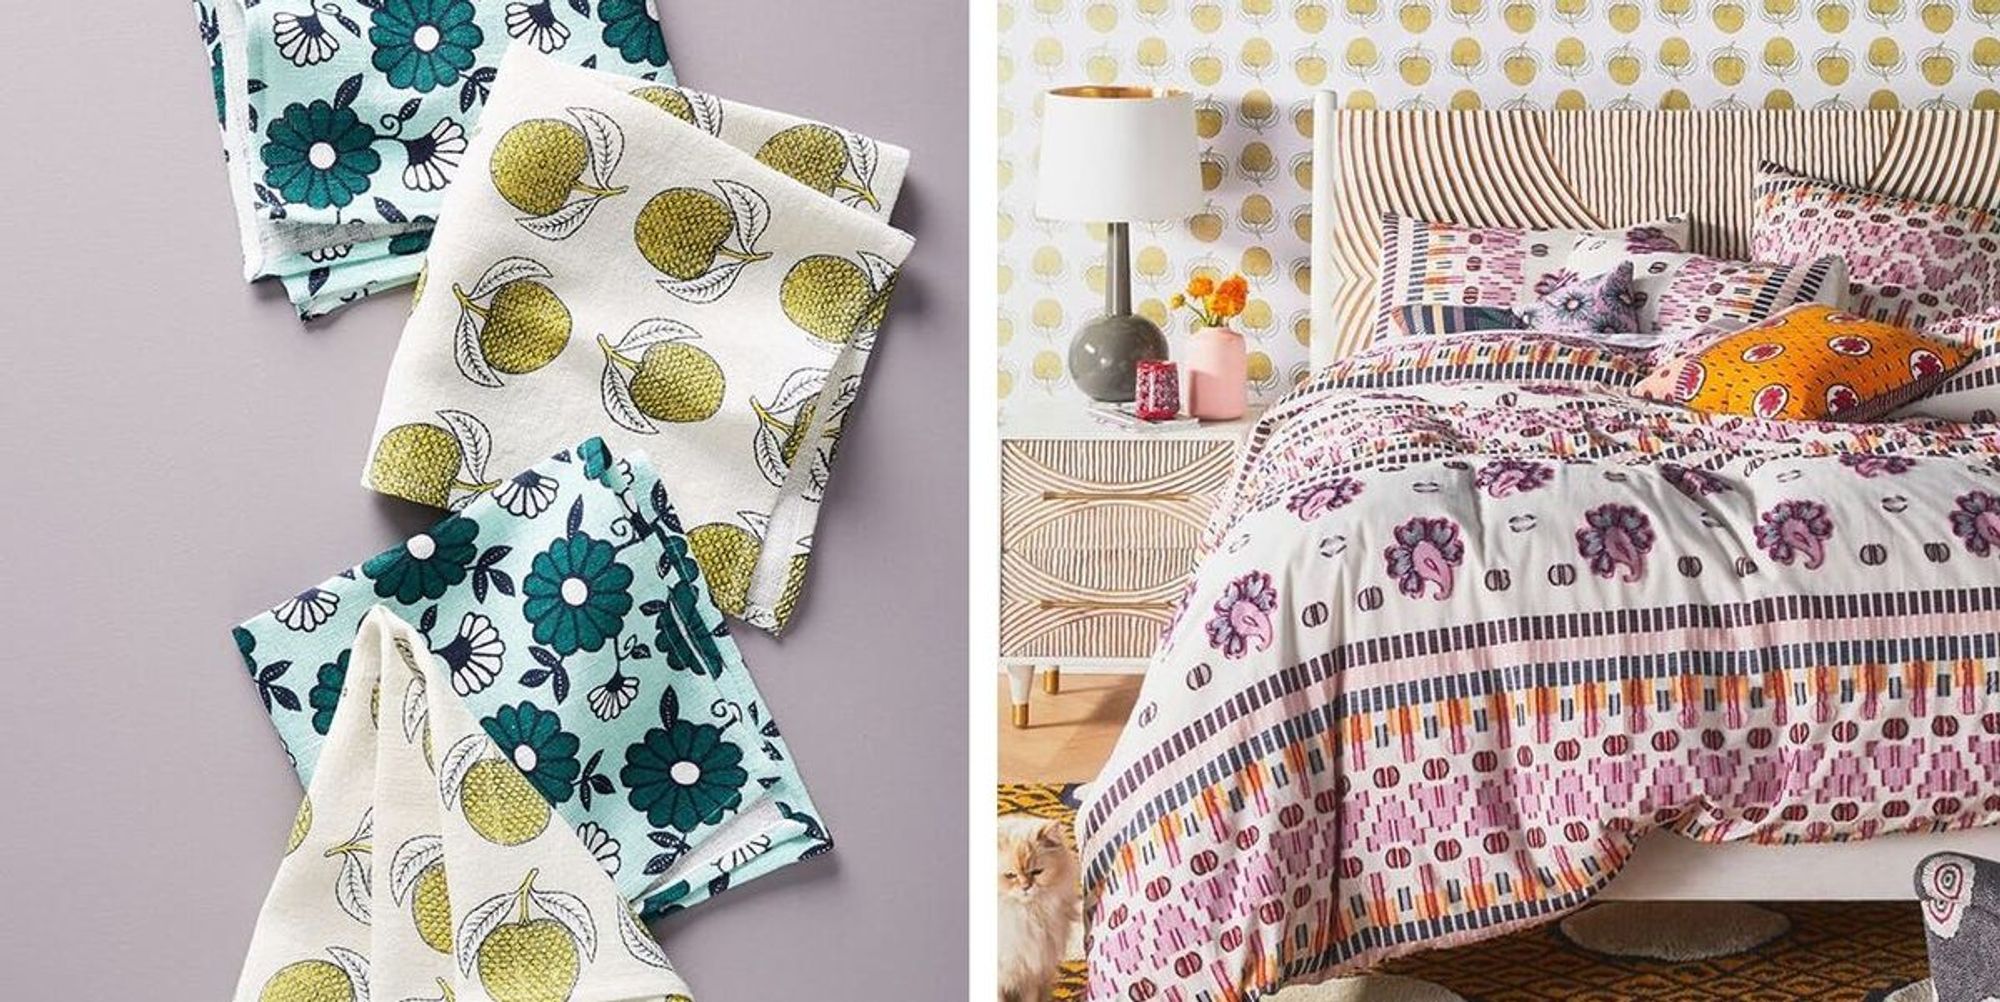 Anthro Just Launched the Dreamiest Vintage Home Collab — Here's What We ...